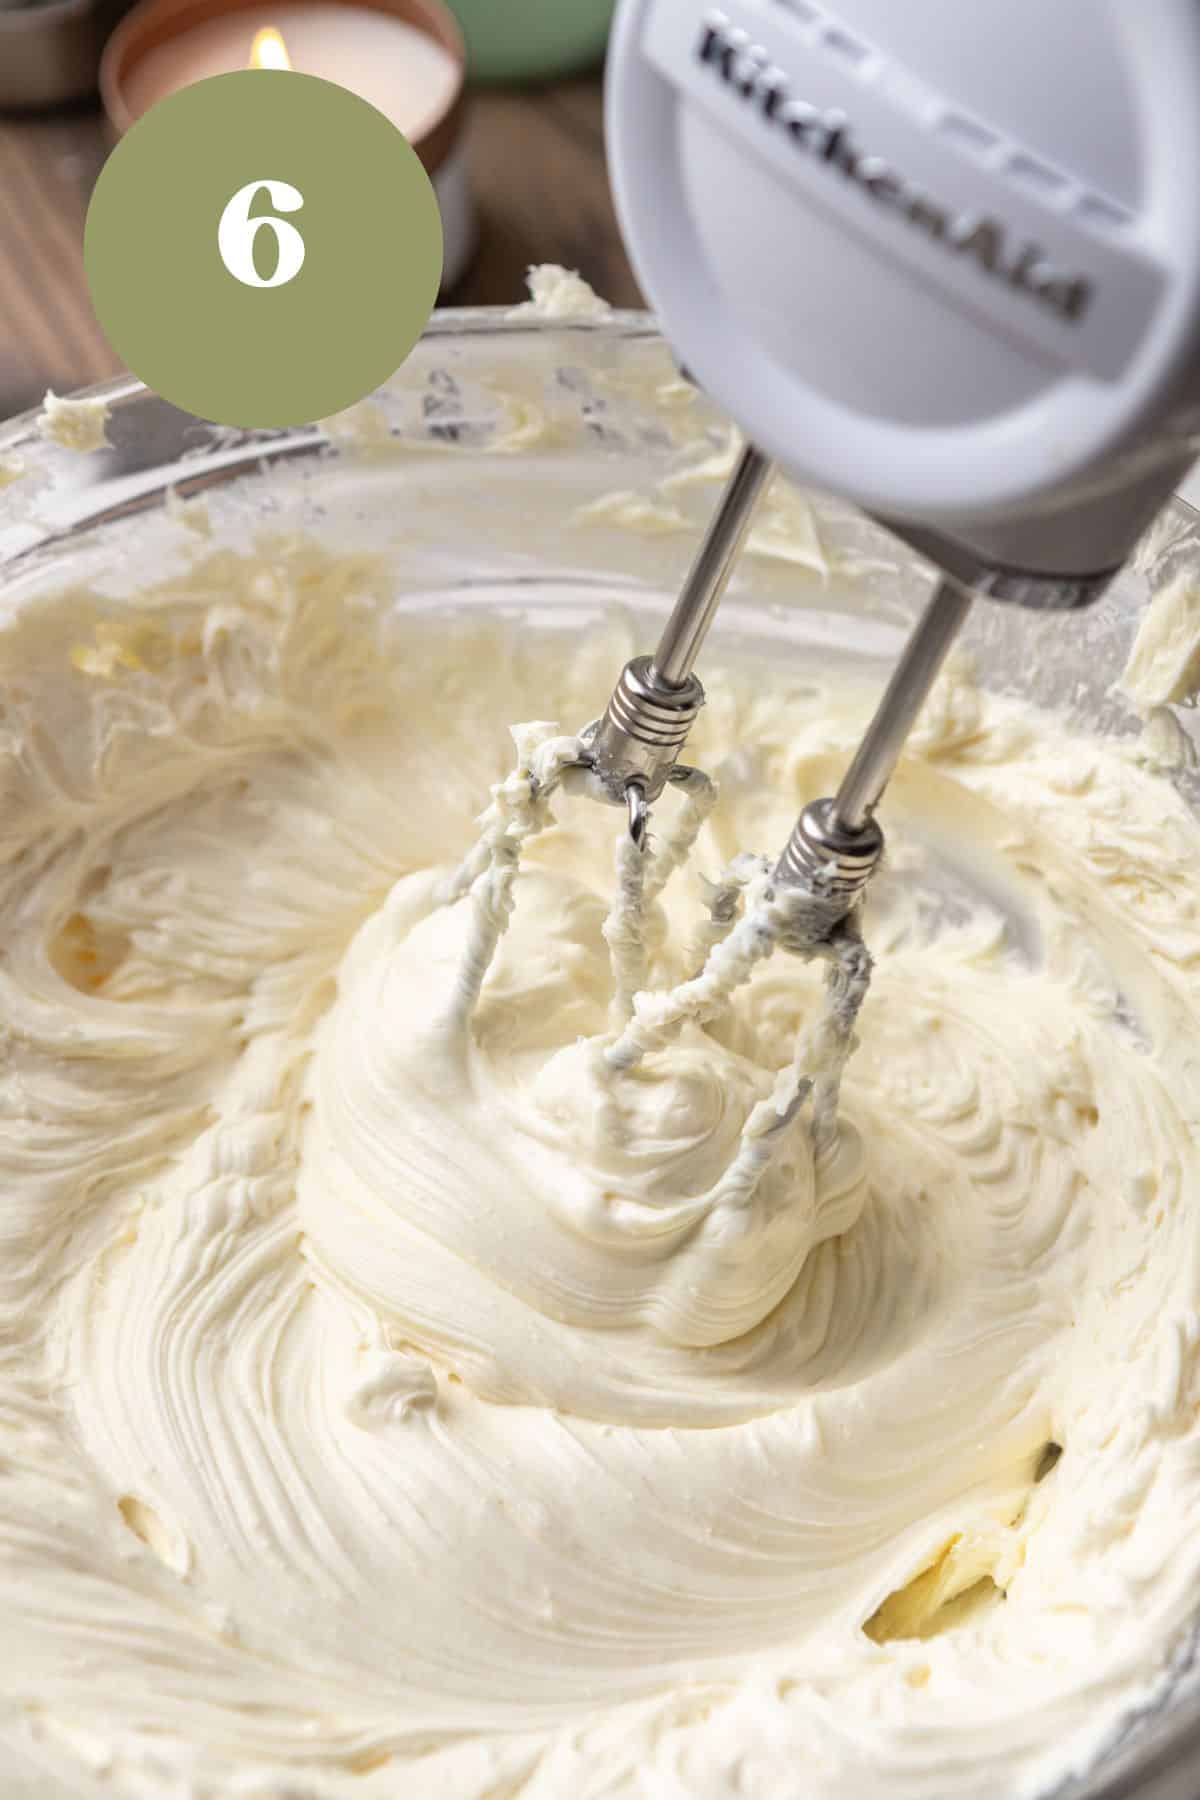 A hand mixer mixing cream cheese and sugar together in a bowl.